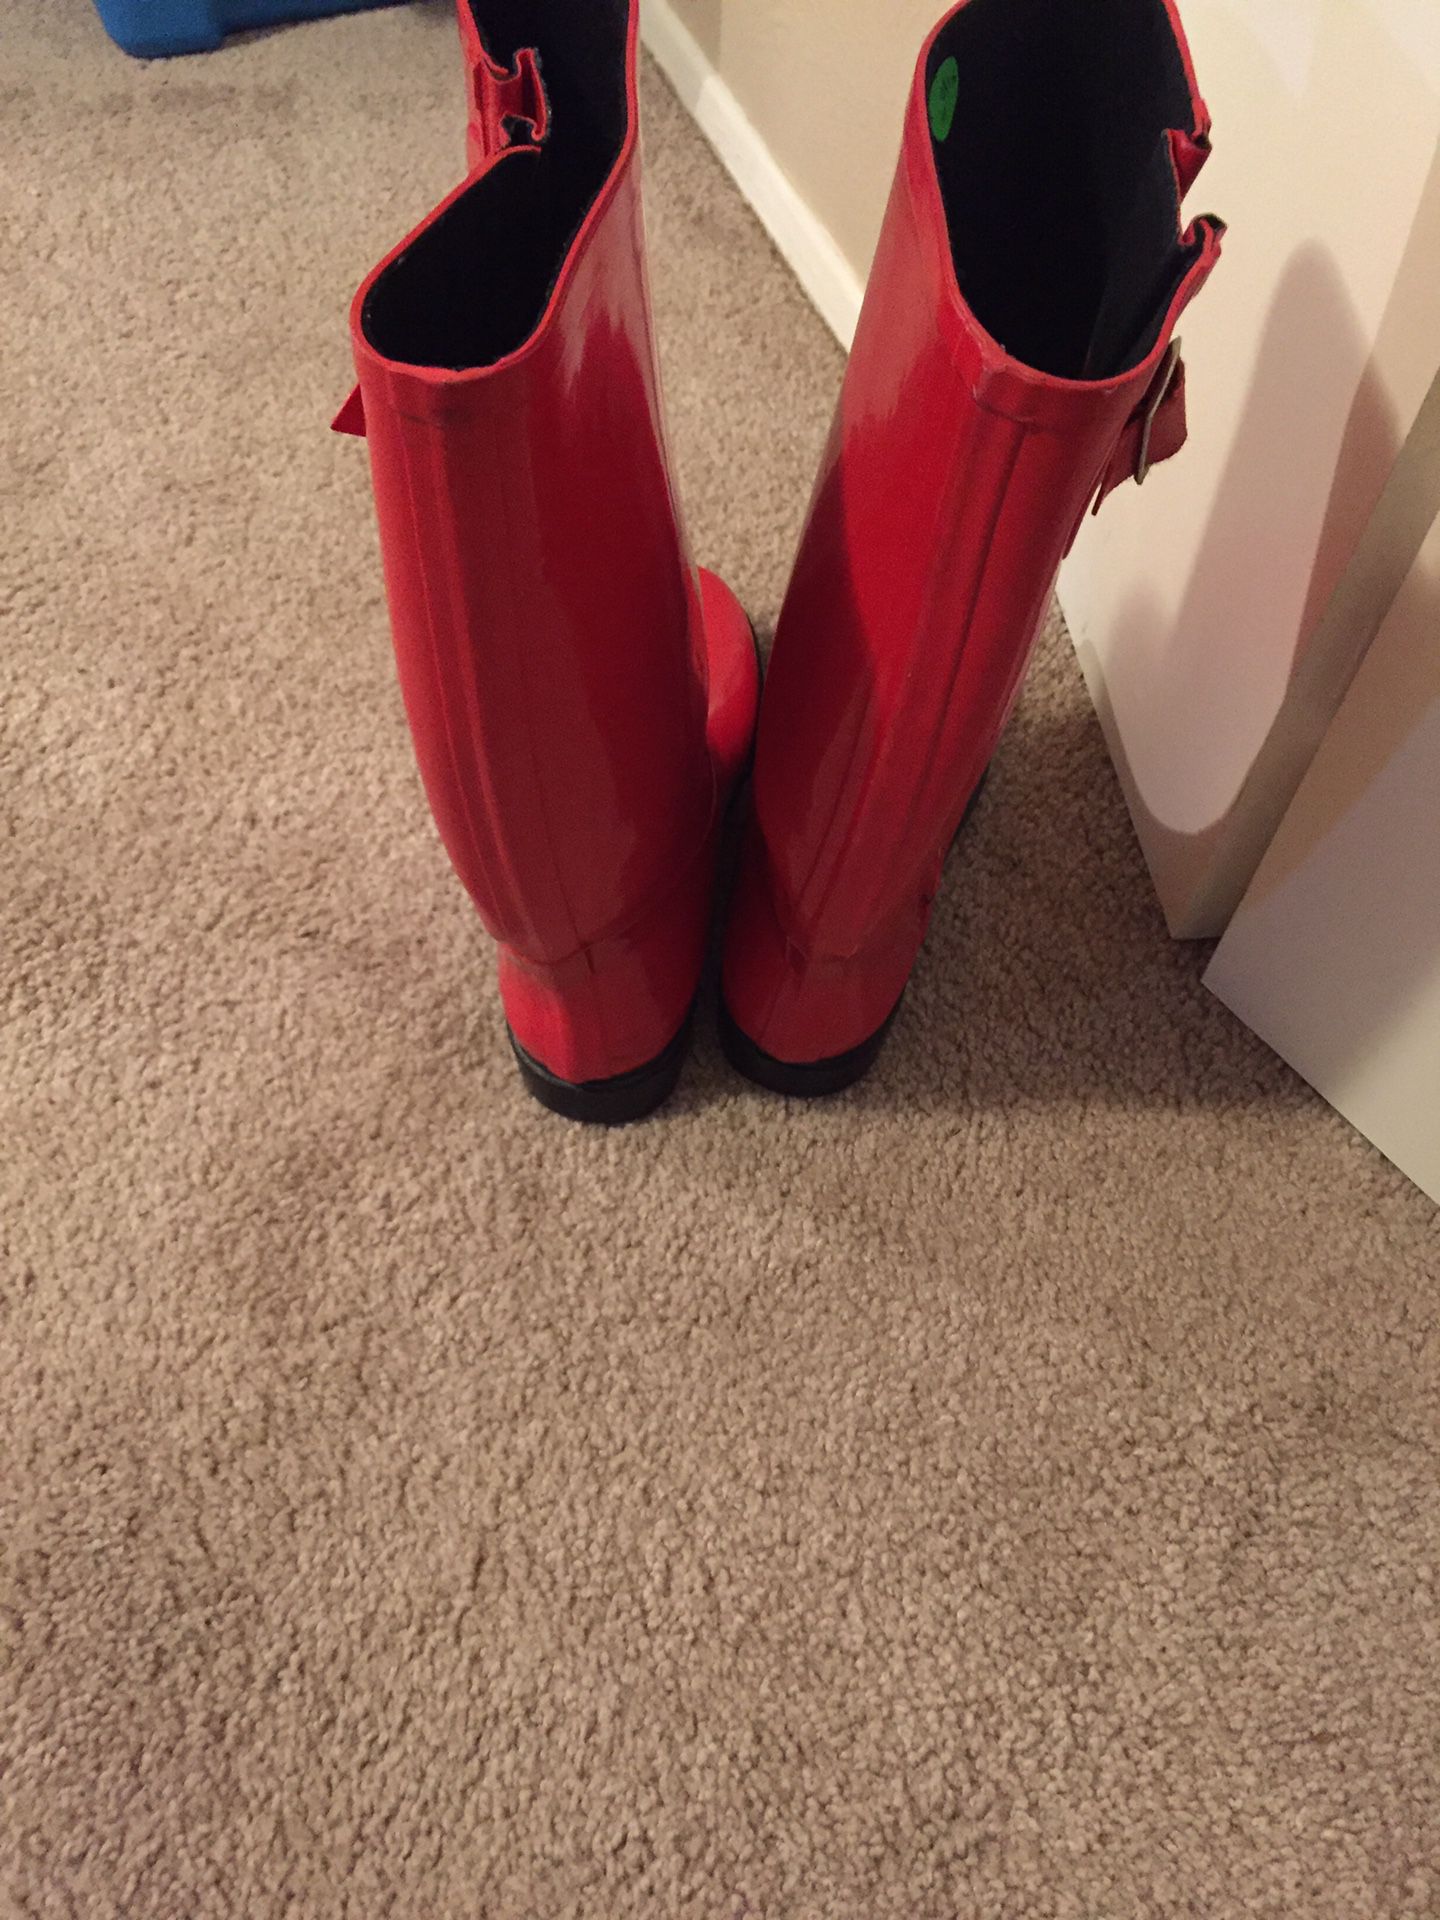 Nomad women gloss rain boots size 9 red